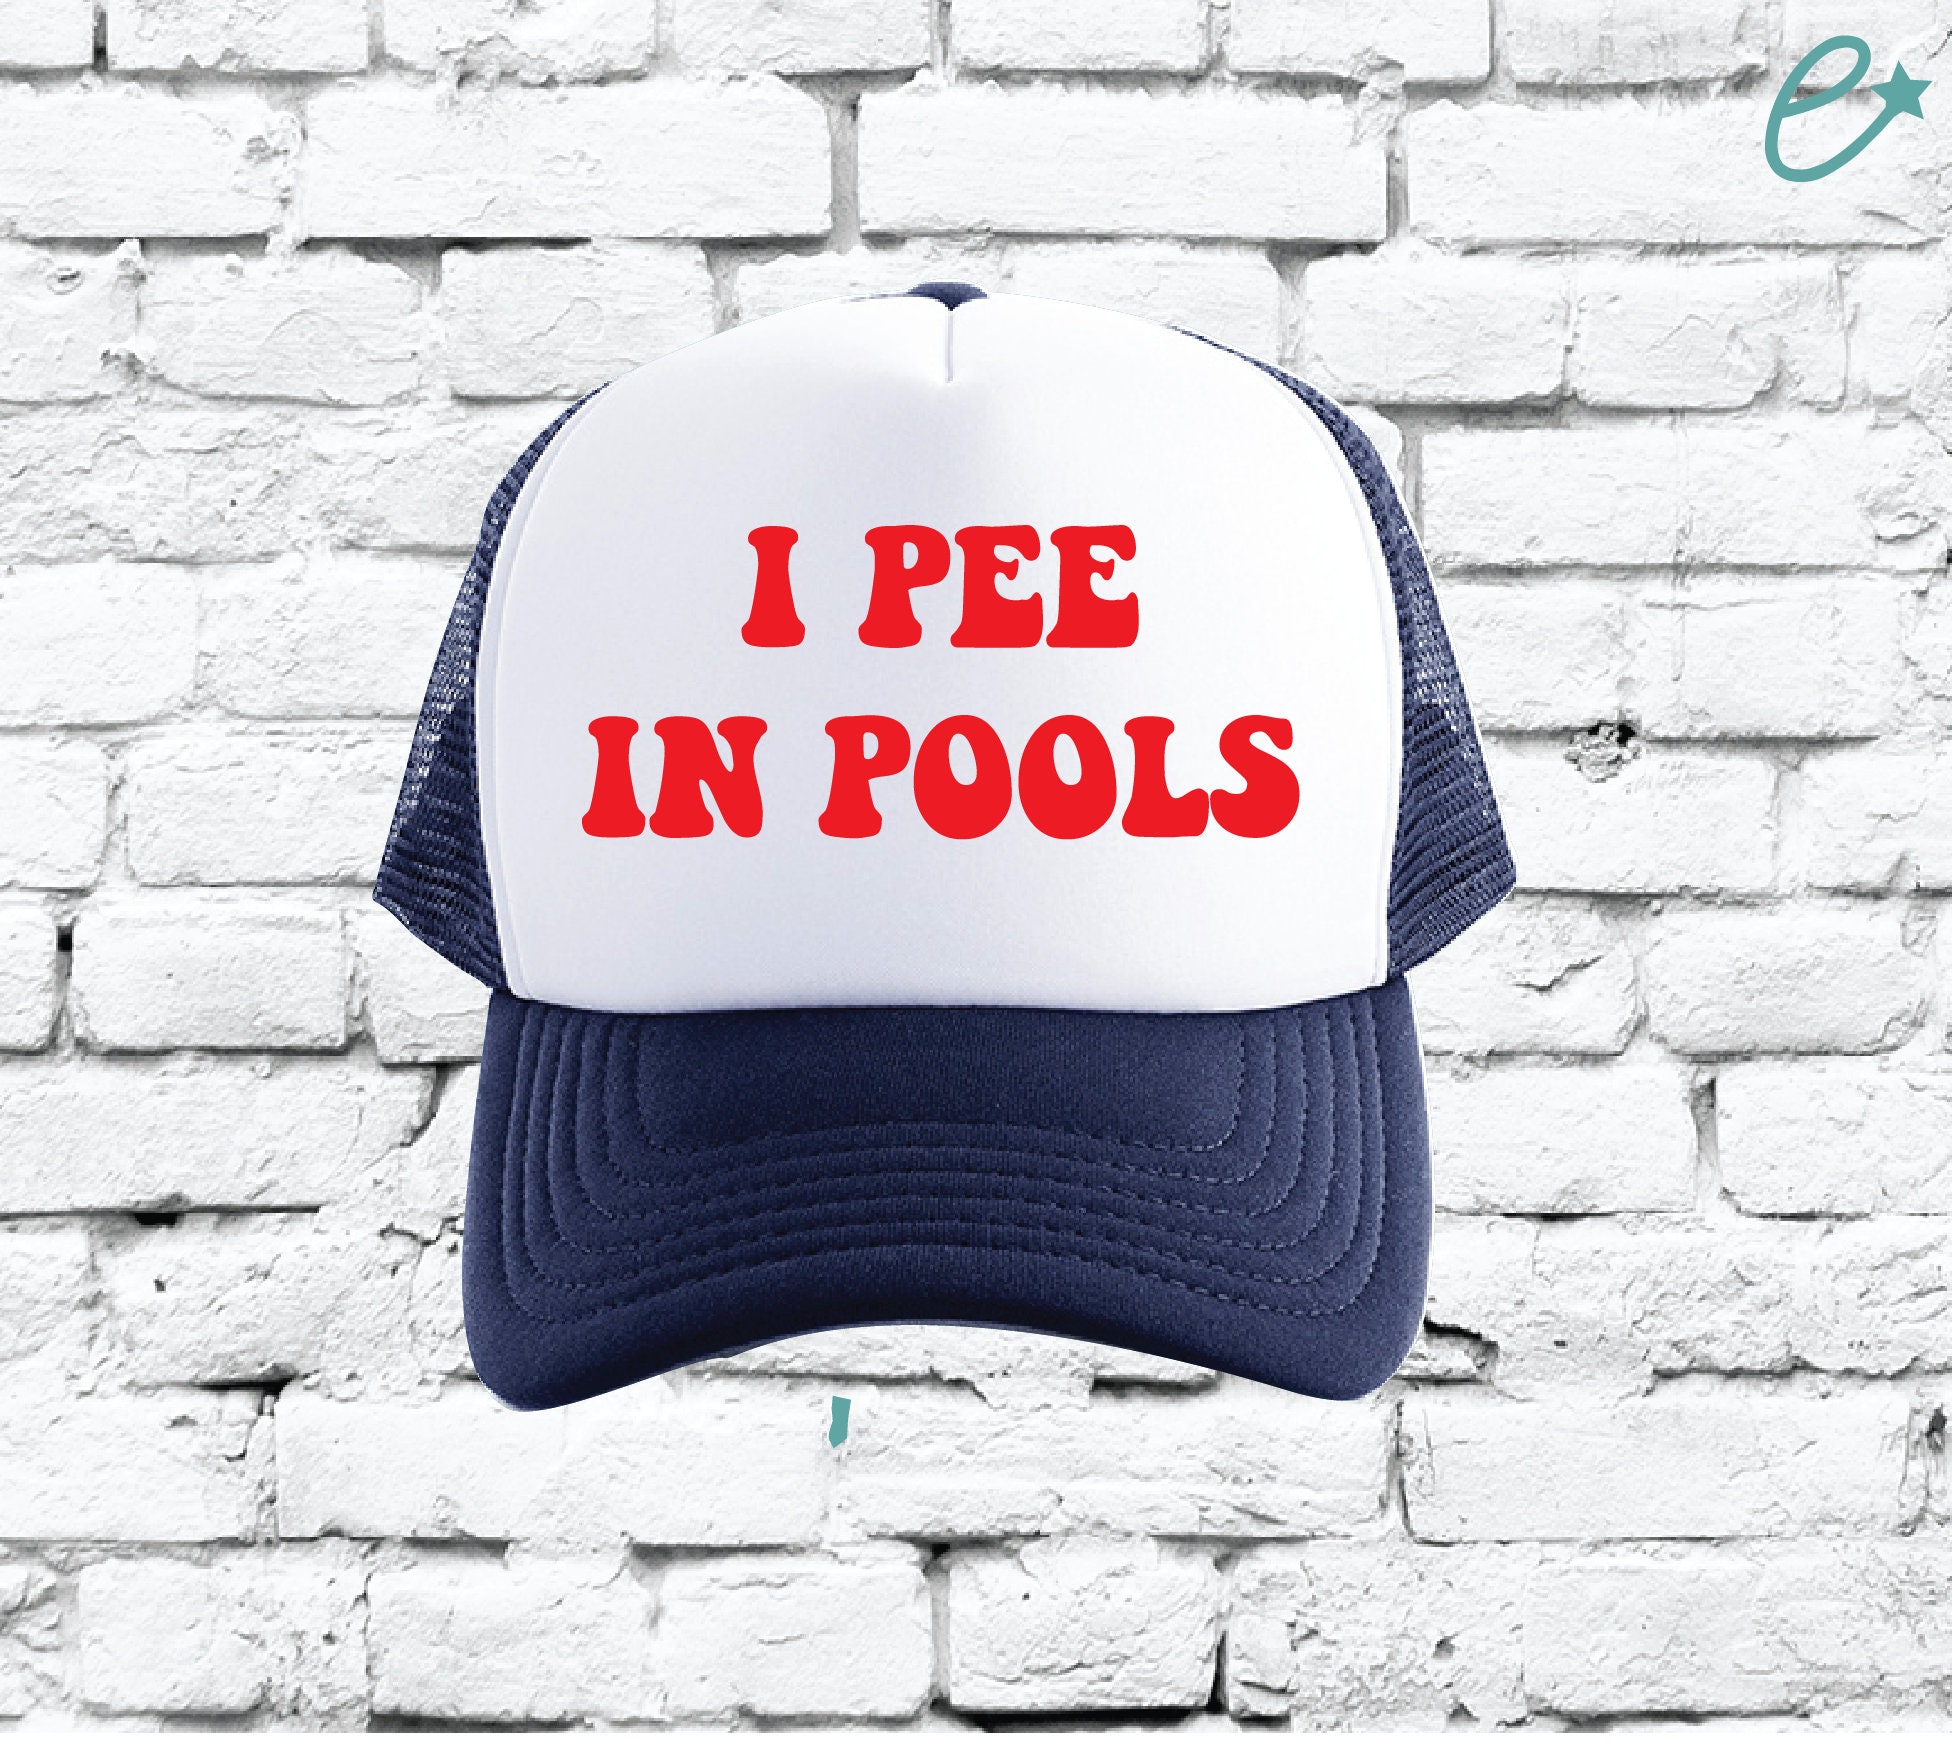 I Pee in Pools Trucker Hats Funny Mesh Back Pool Party Hats 